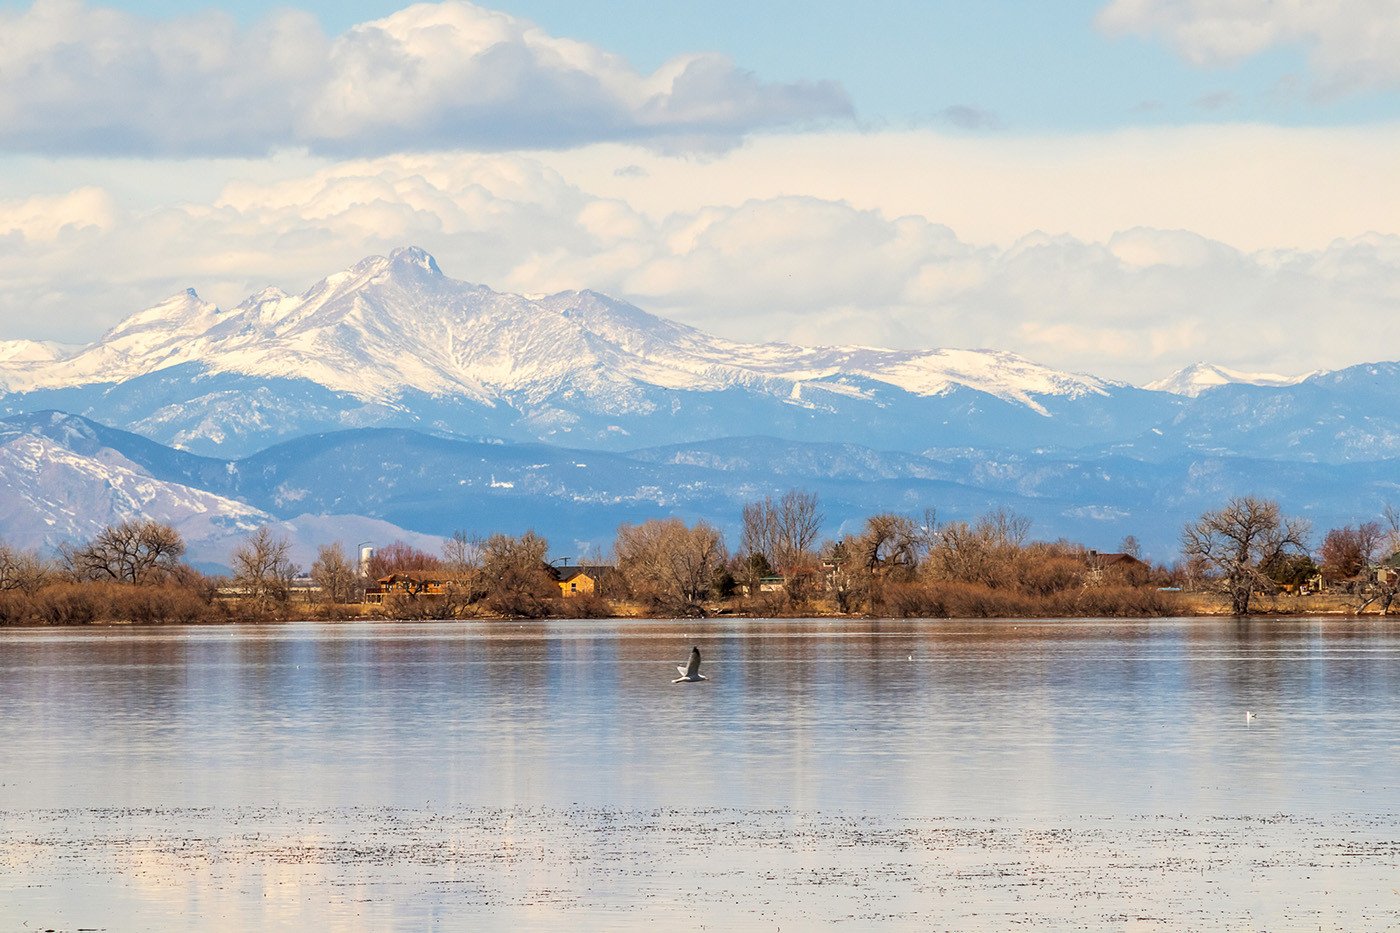 Barr Lake State Park in Brighton, Colorado. Mountains in distance and bird flying over a body of water in foreground.